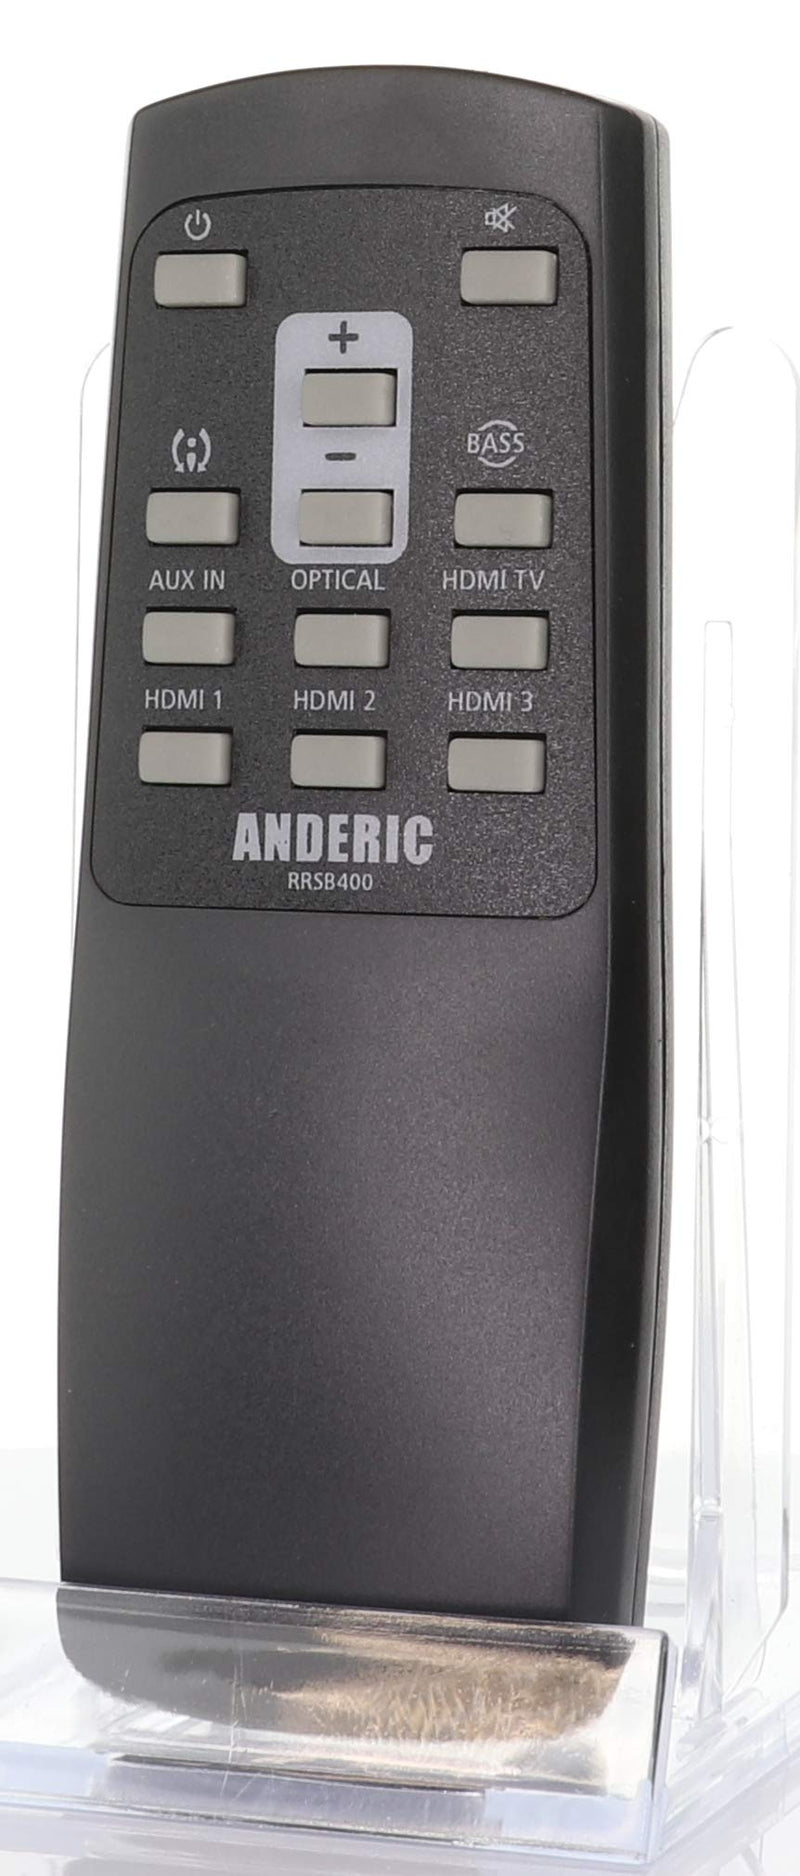 Anderic Remote Control for JBL Cinema SB400 Soundbar JBL Cinema SB200 Soundbar JBL Cinema SB100 SoundBar System - No Programming Needed - No Coin Battery, uses Standard Batteries!